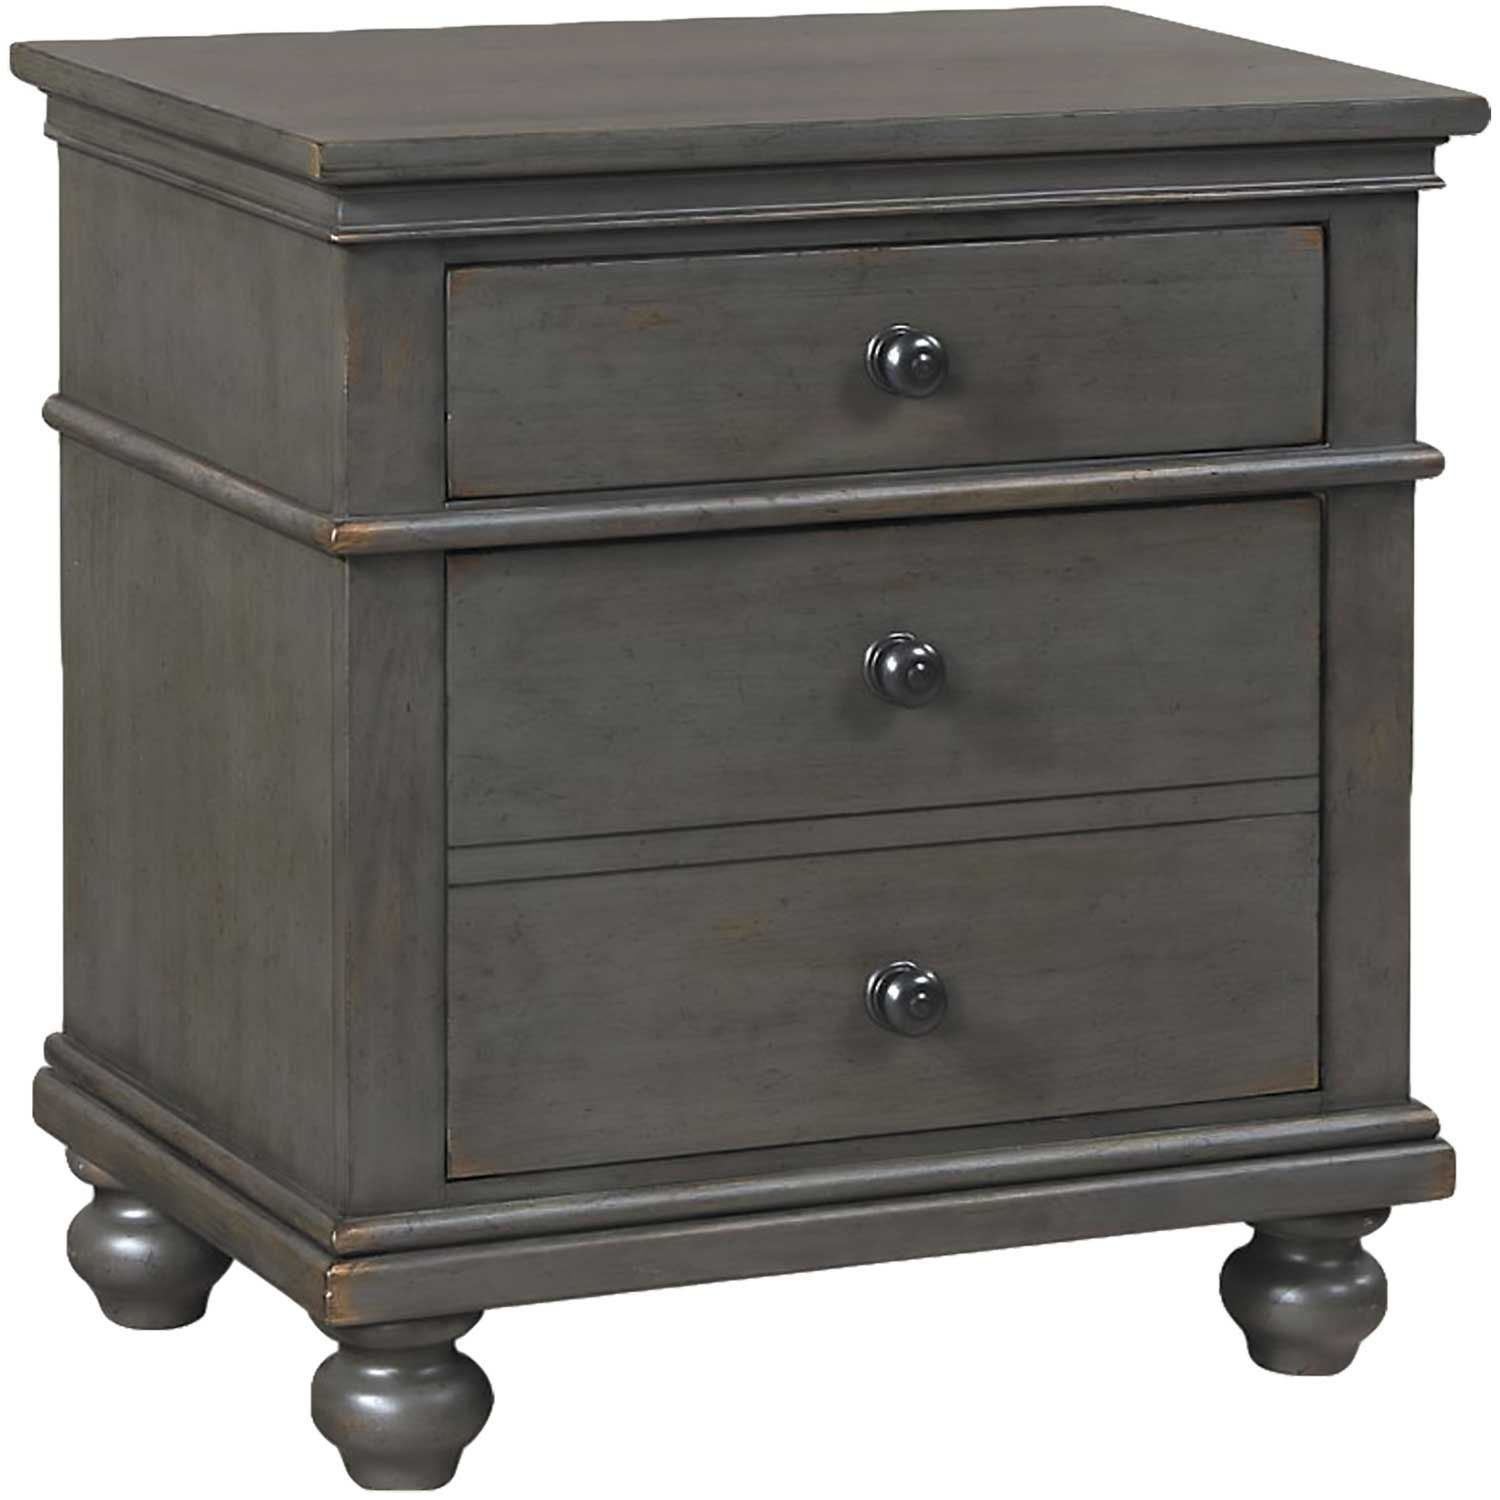 Details about   GREY FABRIC BED SIDE TABLE 2 DRAWERS 